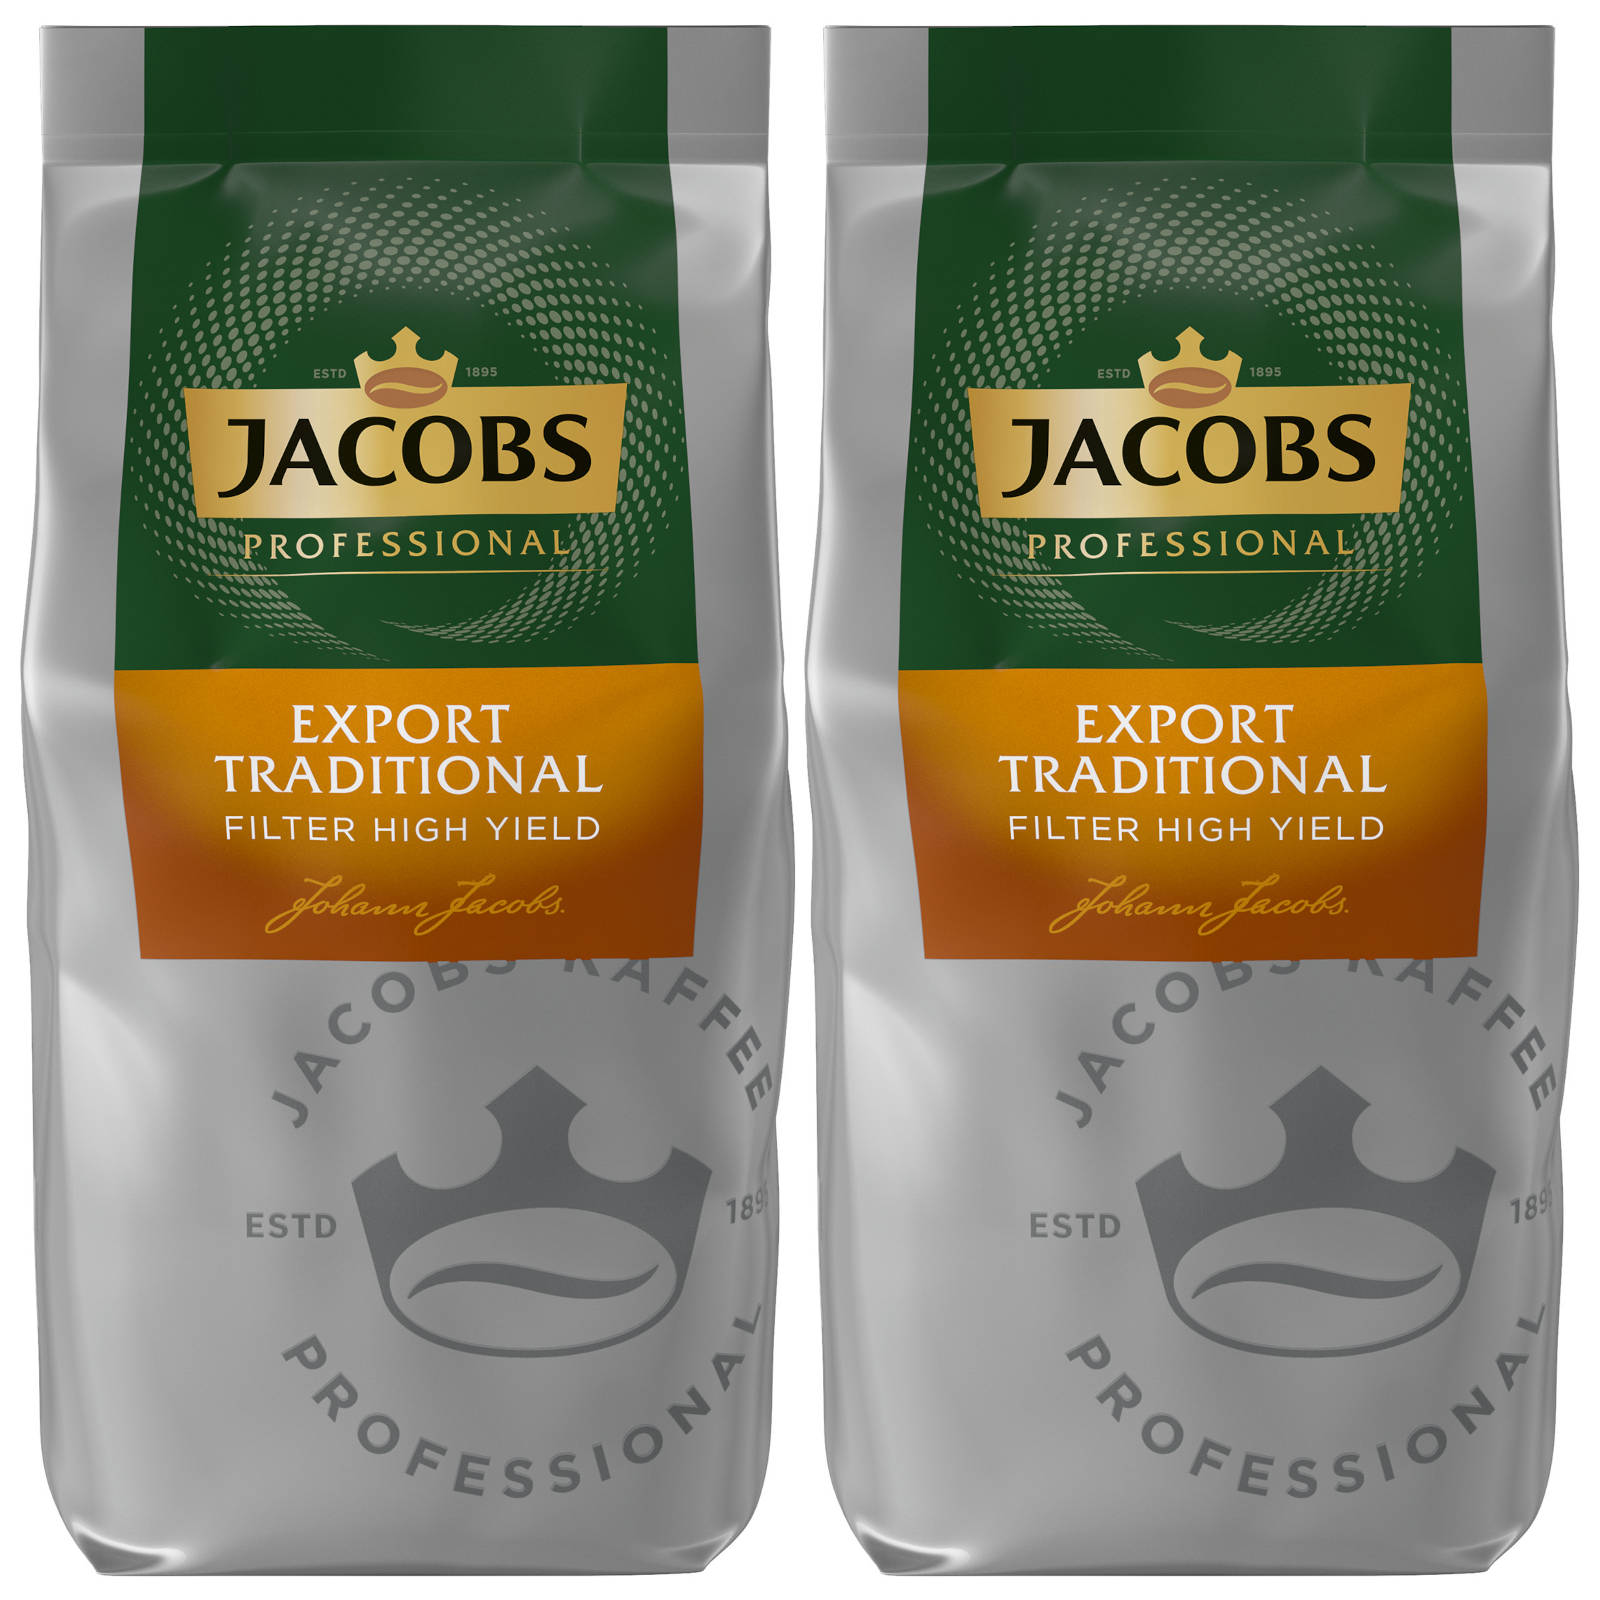 2x800g Export Professional JACOBS Filterkaffee French (Filtermaschinen, Press) Yield Traditional High